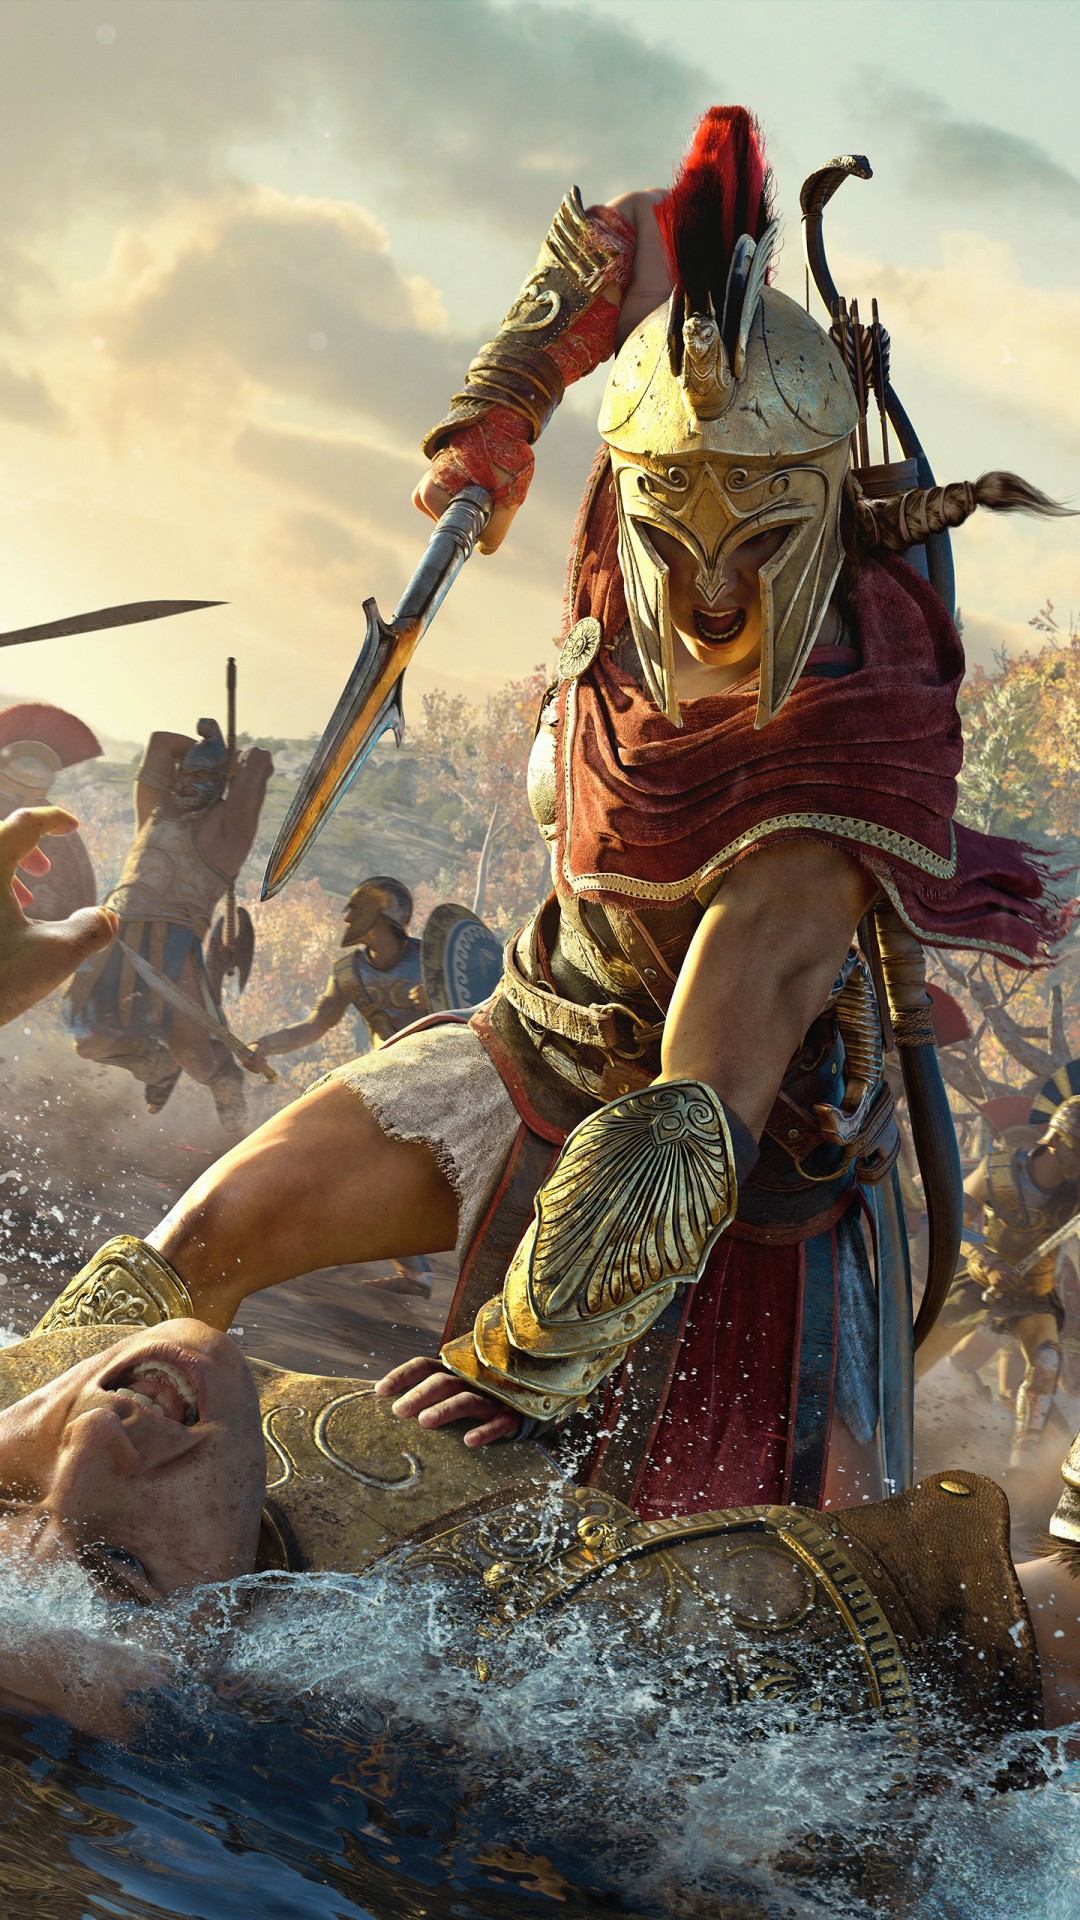 assassin's creed android wallpaper,action adventure game,cg artwork,mythology,conquistador,warlord